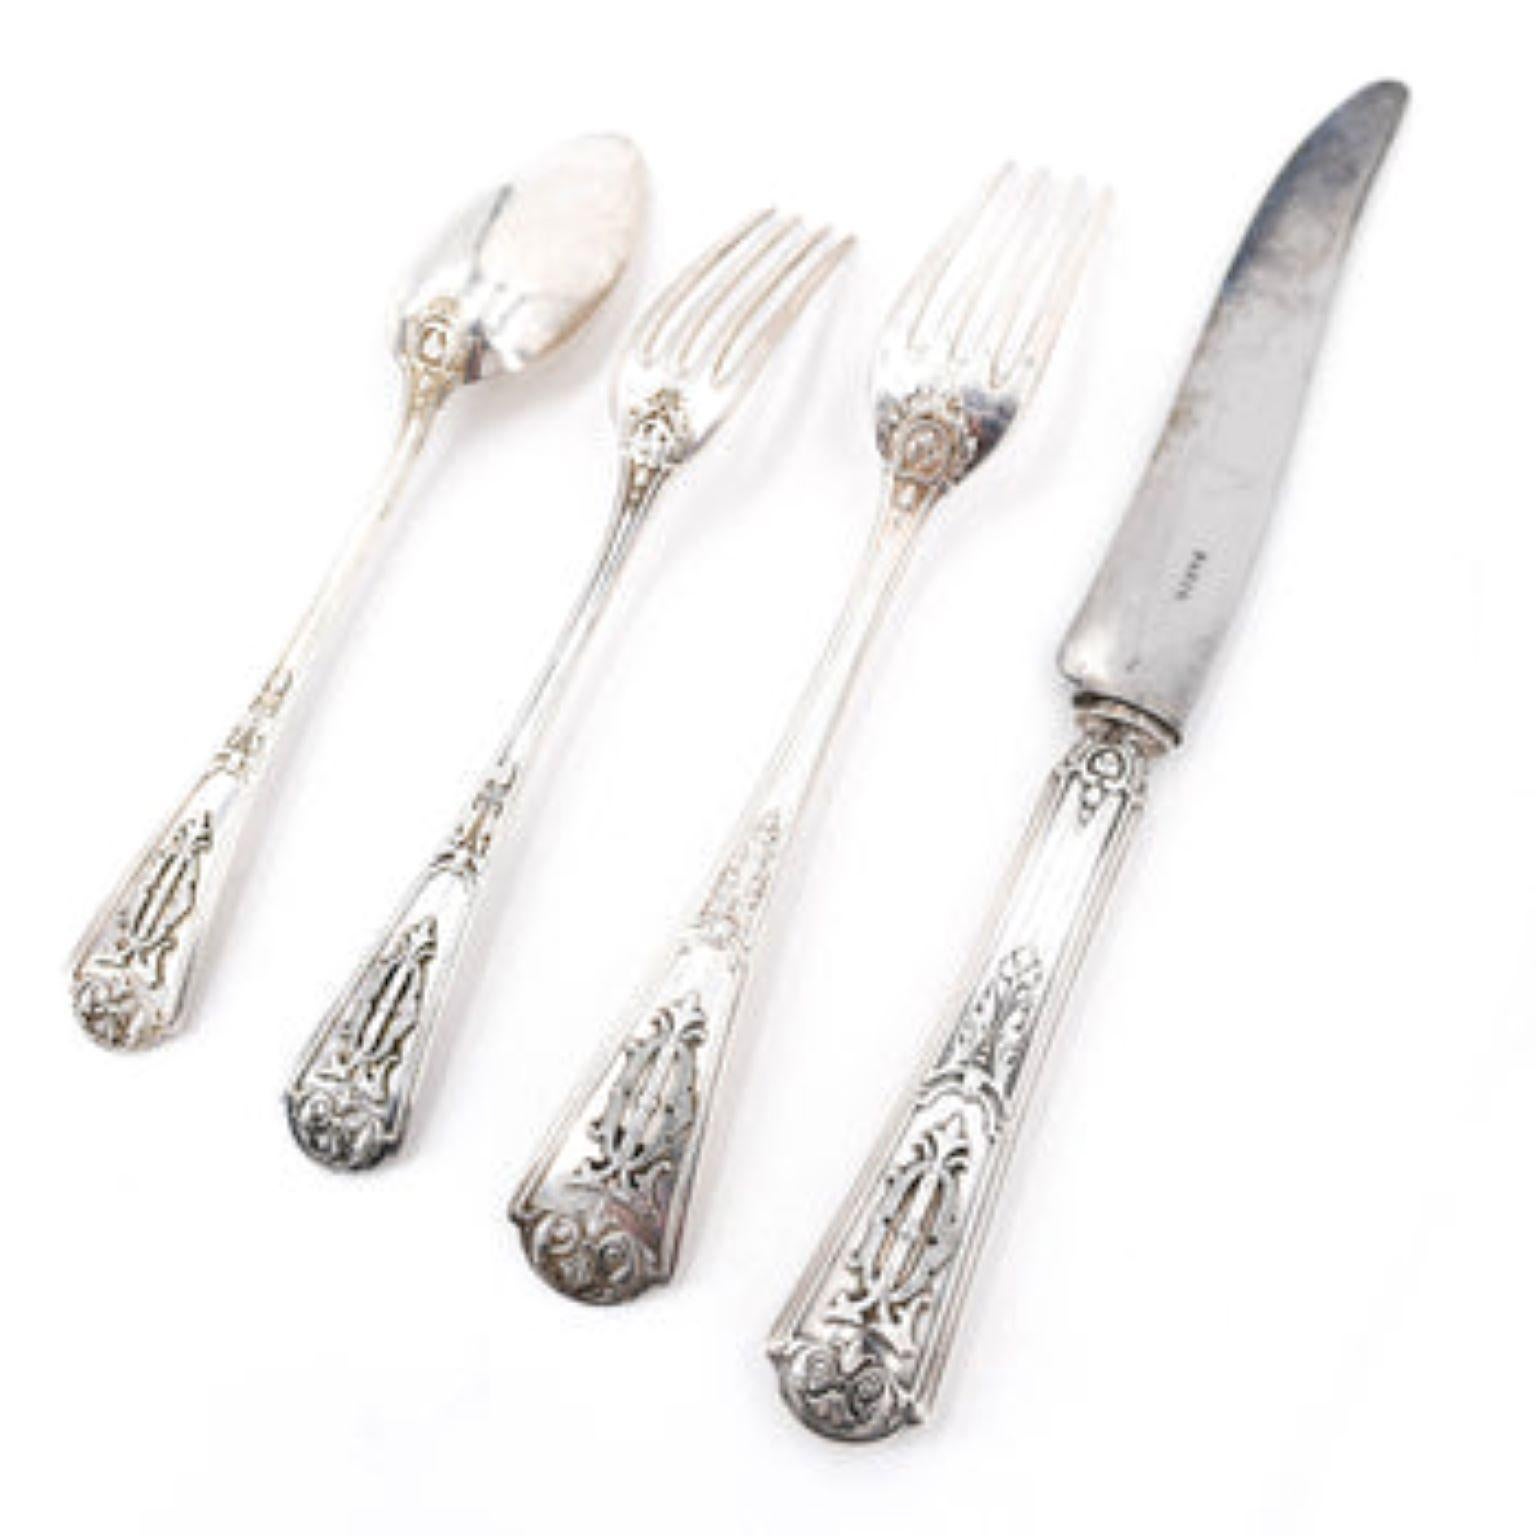 91 Piece Sterling Silver Flatware from Paris In Good Condition For Sale In Vista, CA